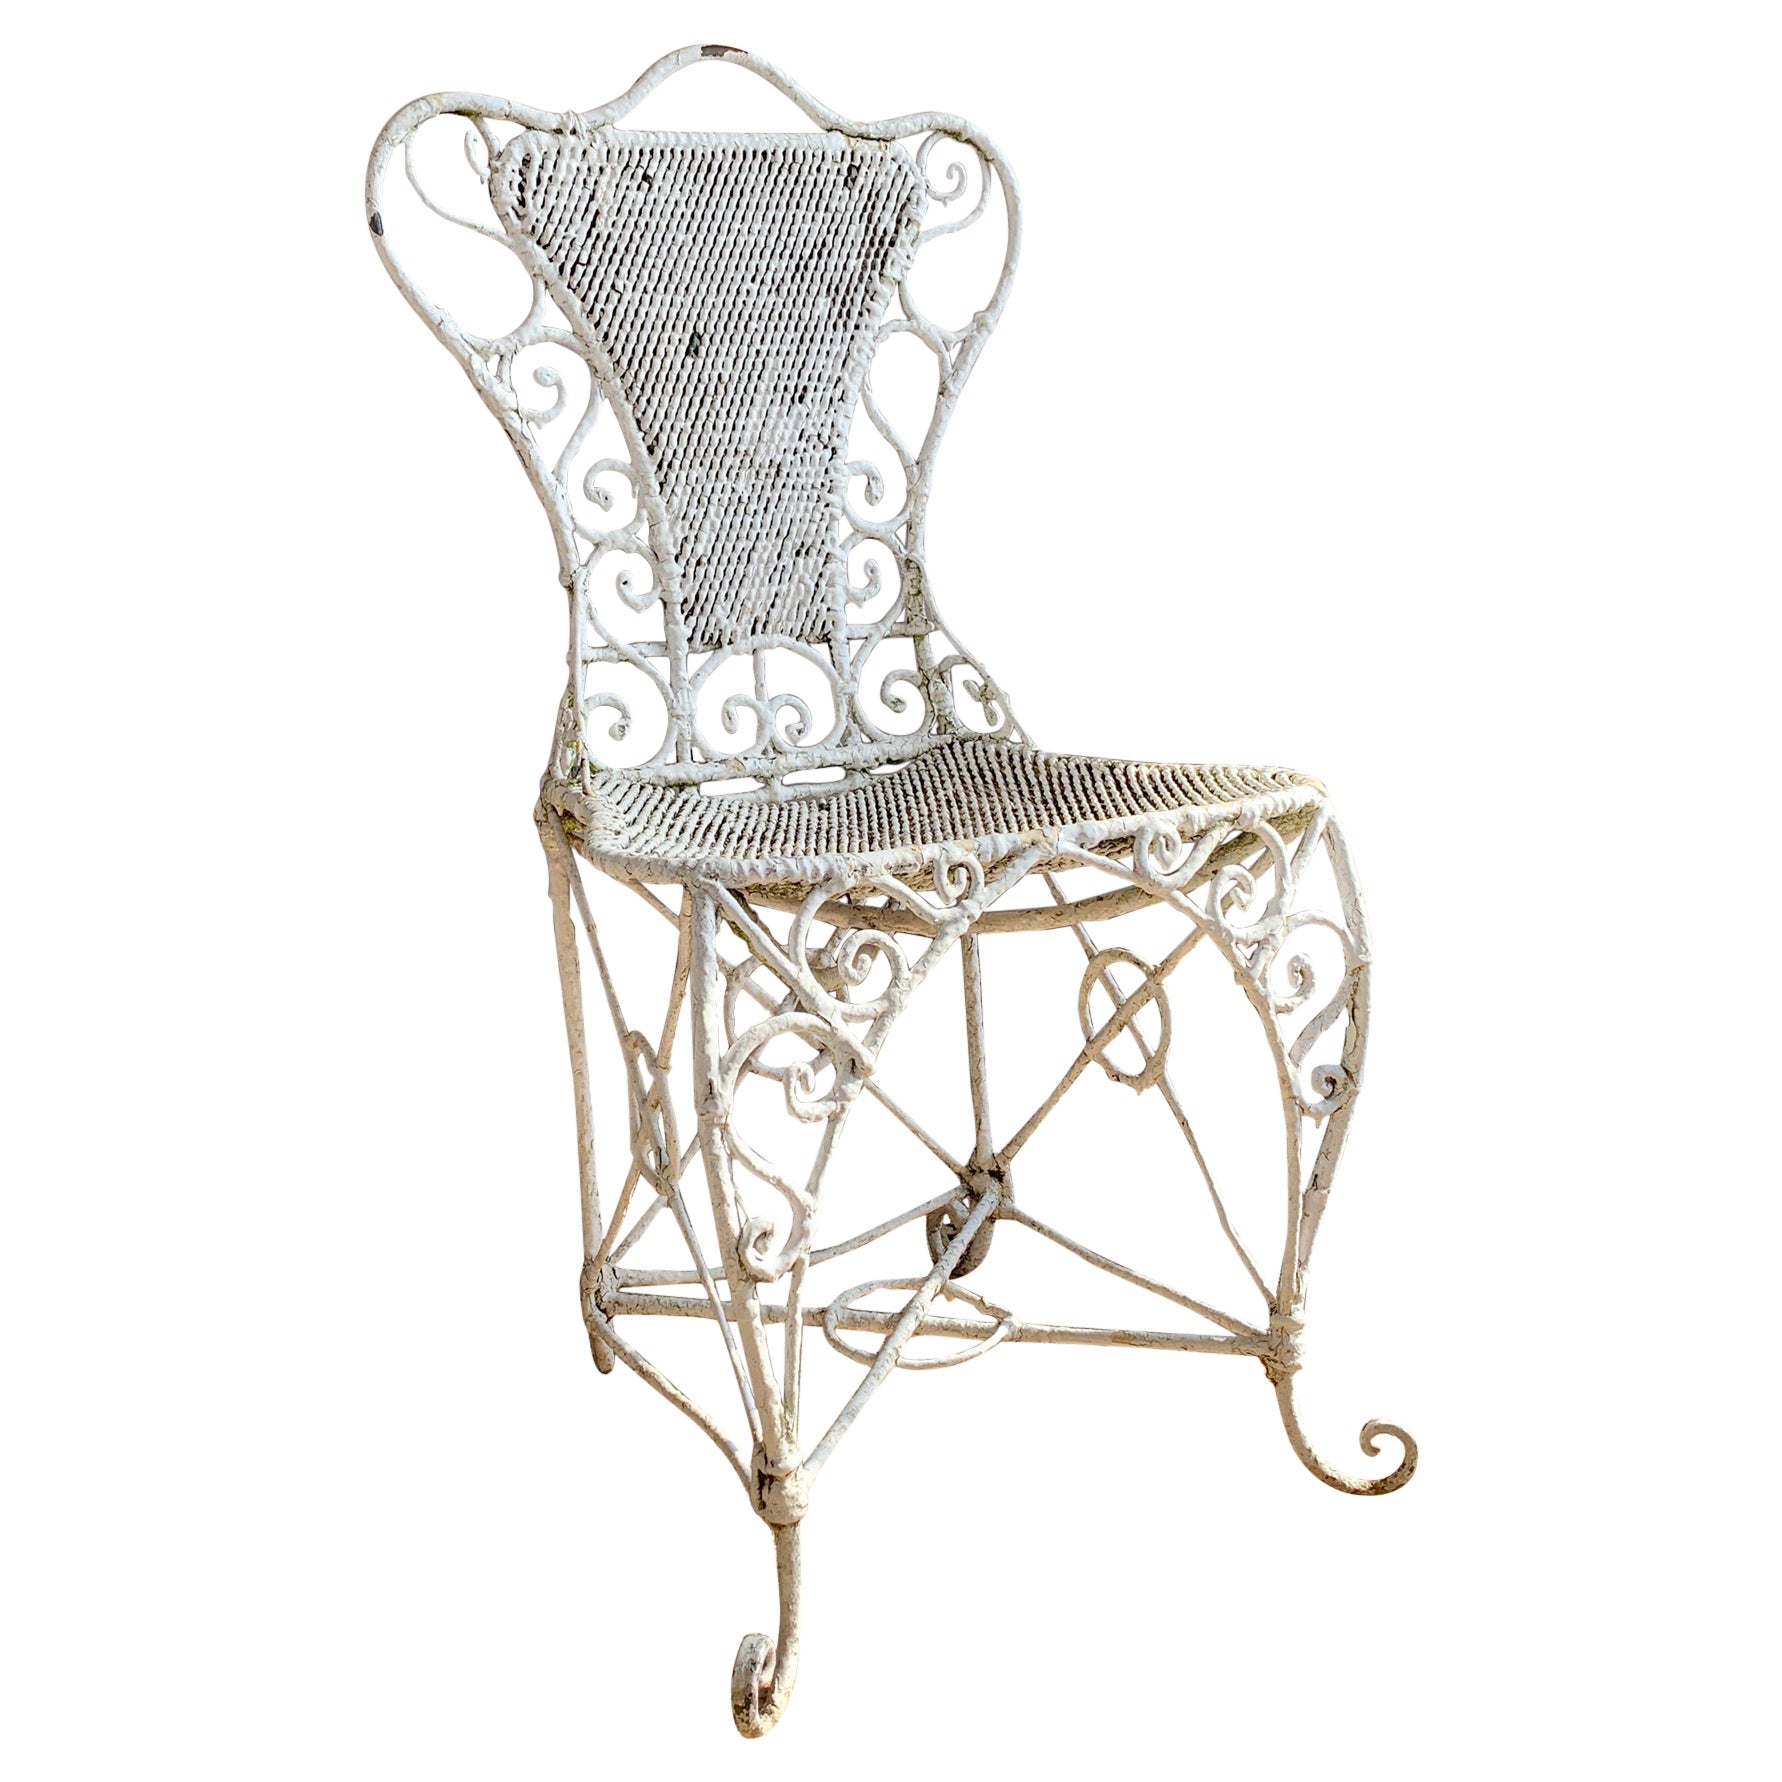 Ornate Regency White Wirework Iron Chair For Sale